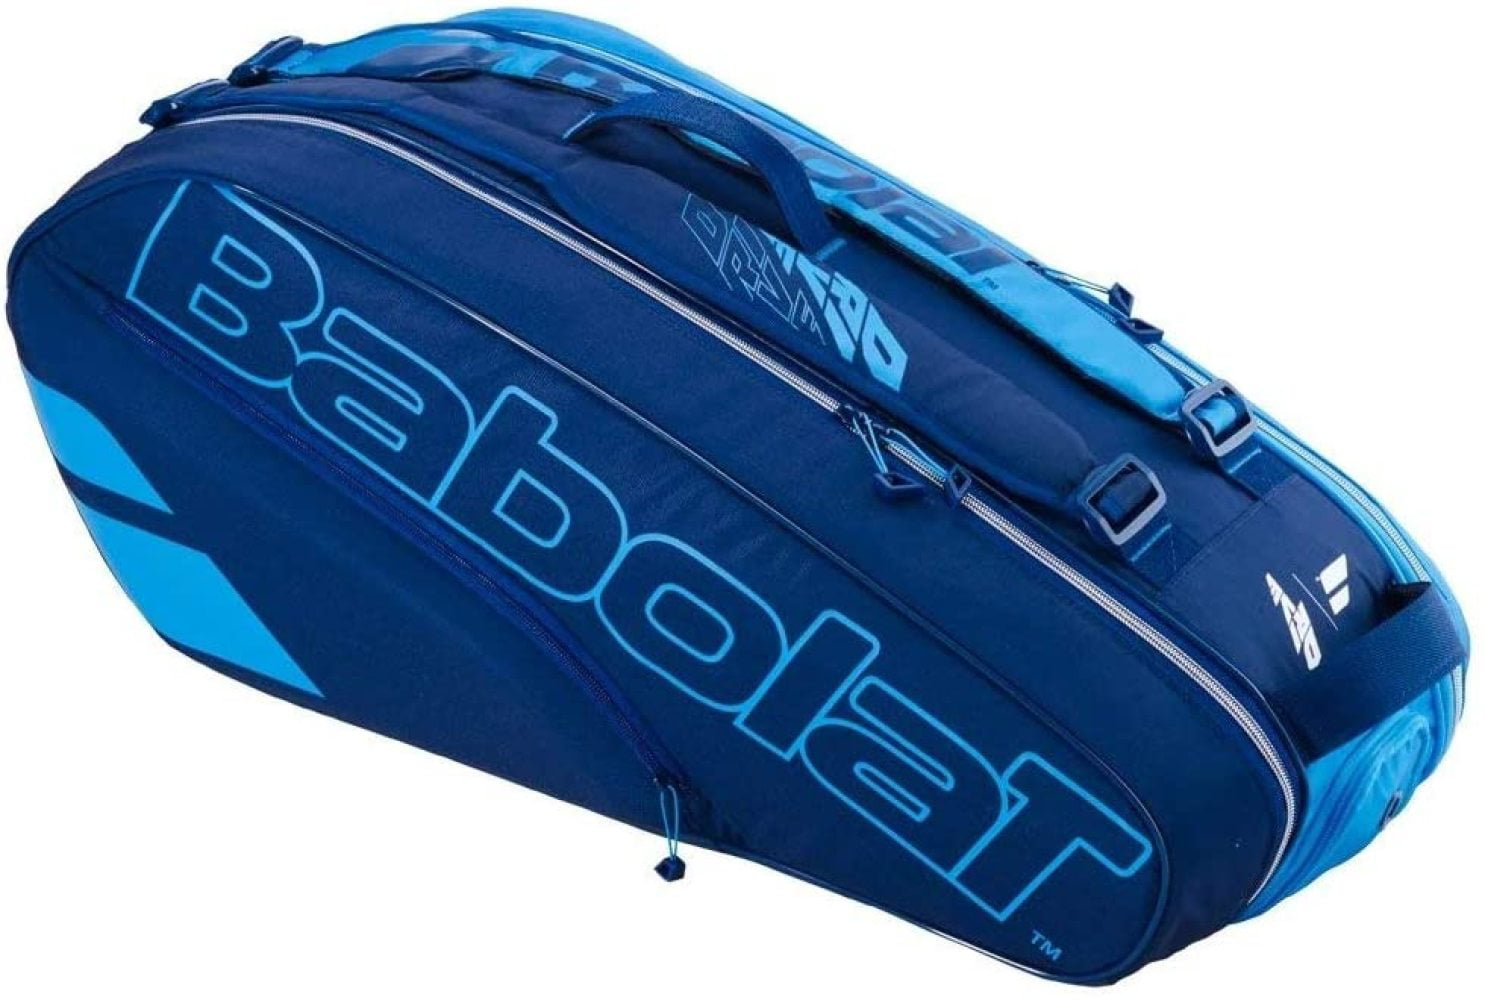 Babolat 16 x 11 inch Yellow Bag Racket Cover 